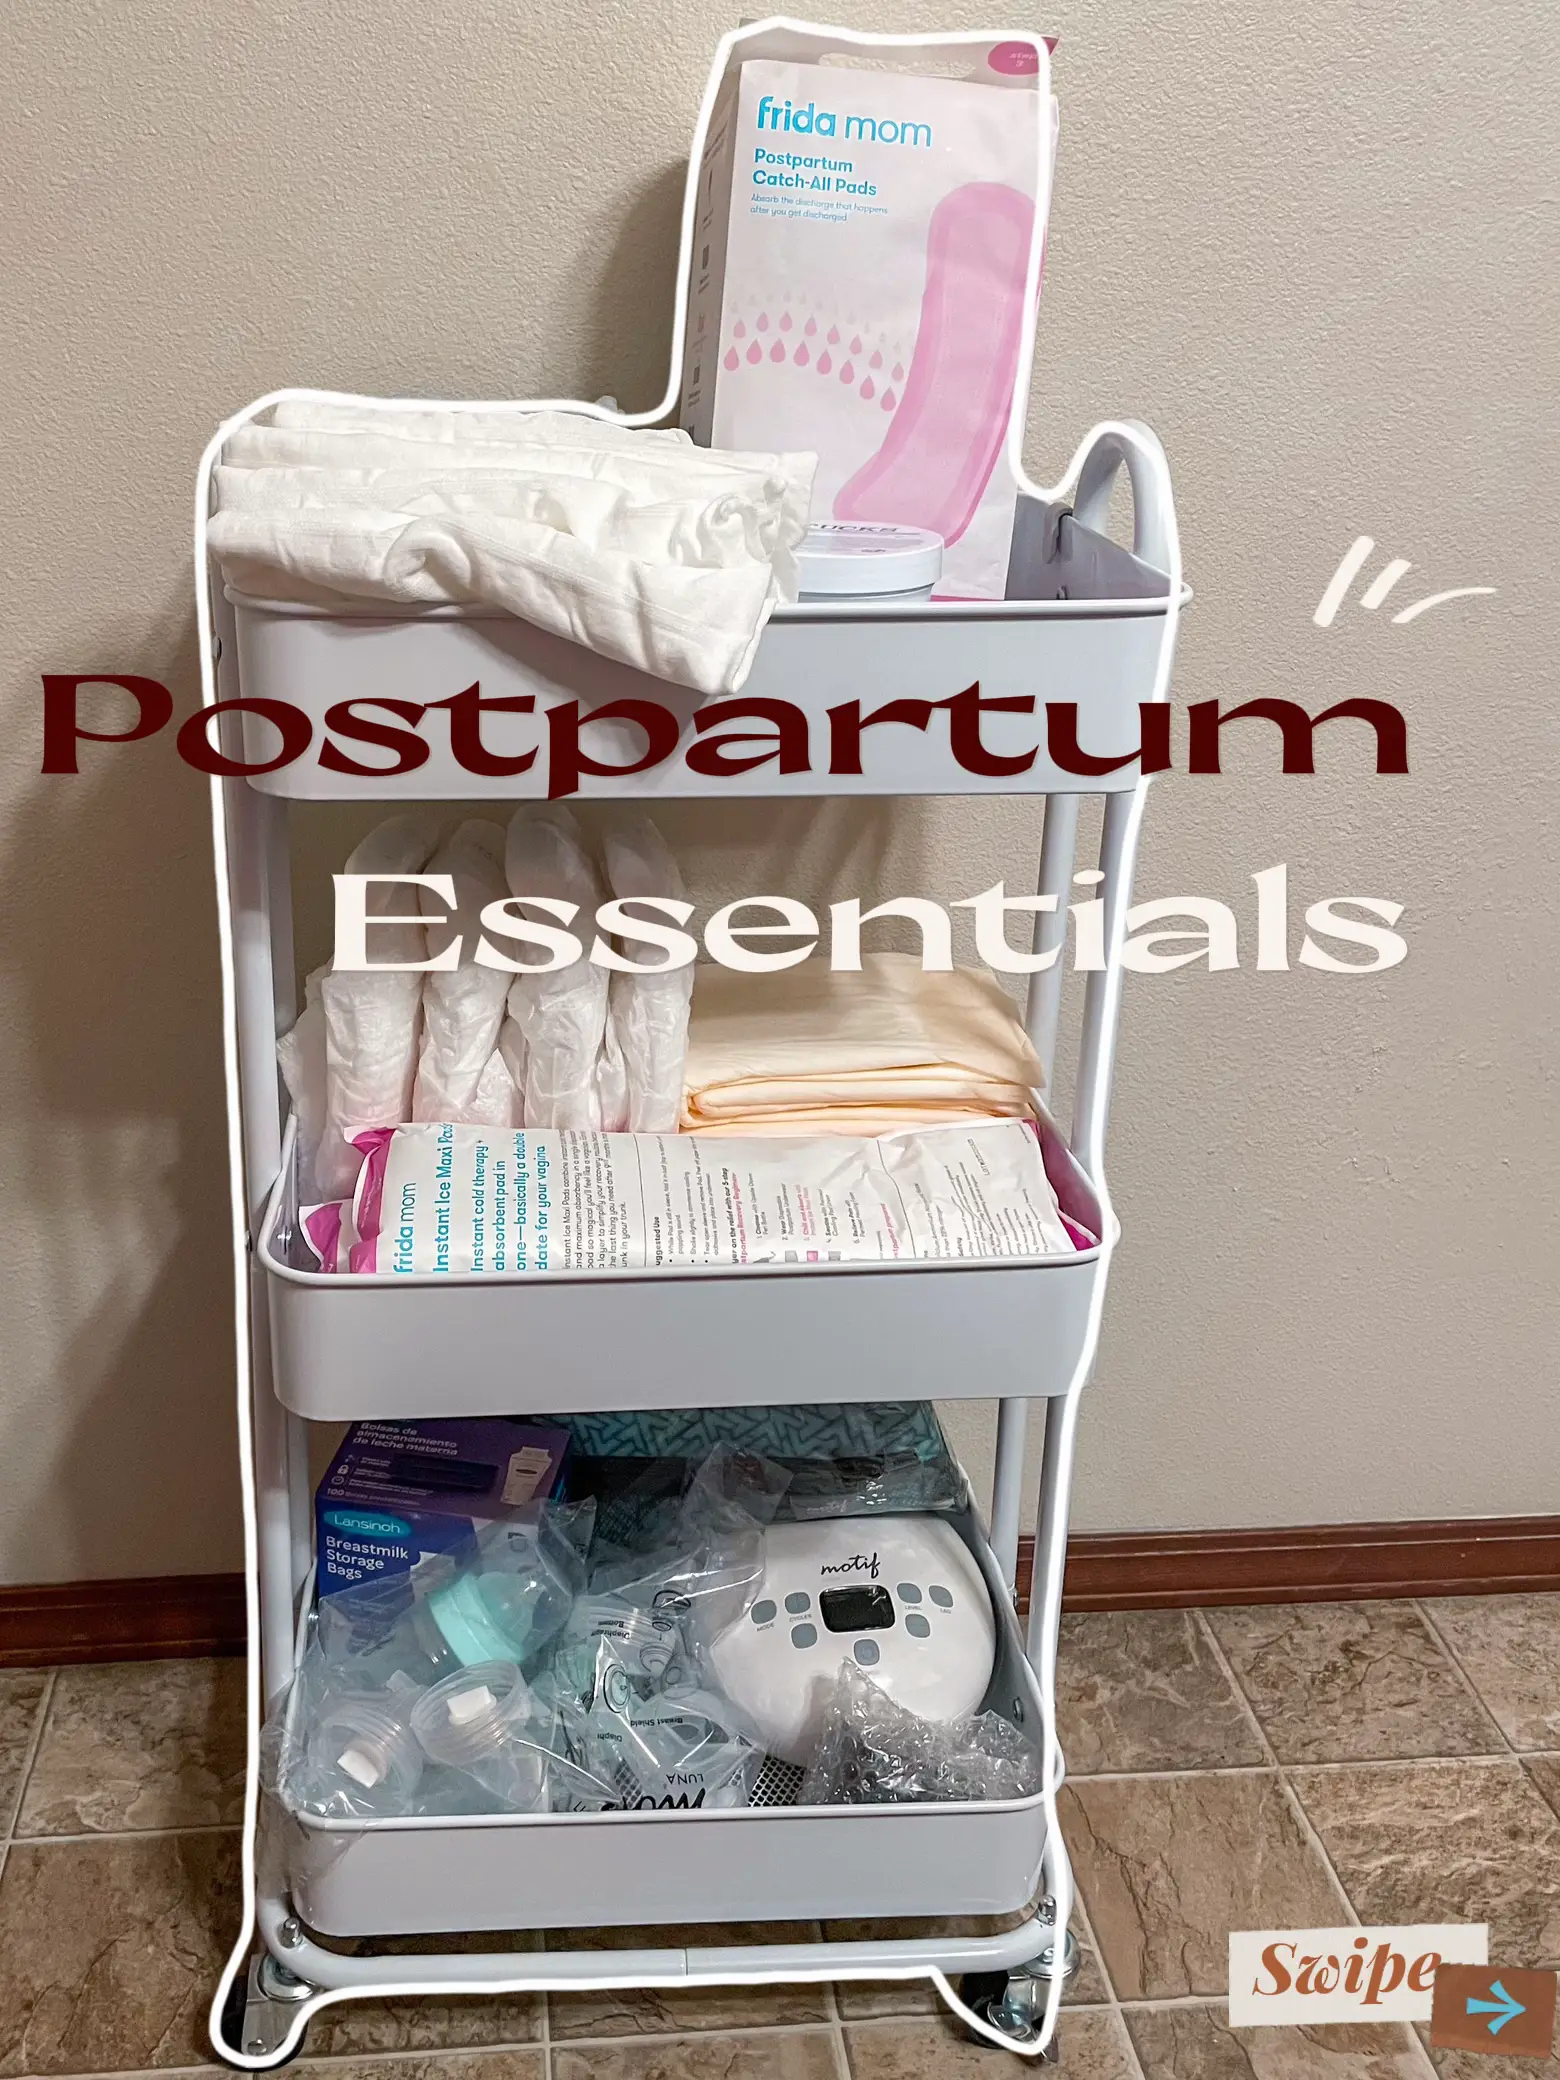 Postpartum Essentials Kit for Mom (14-Piece) - Includes Labor and Delivery  Gown, Peri Bottle, Witch Hazel Foam, Pad Liners & More! Postpartum Care Kit  with Hospital Essentials for Women After Birth 